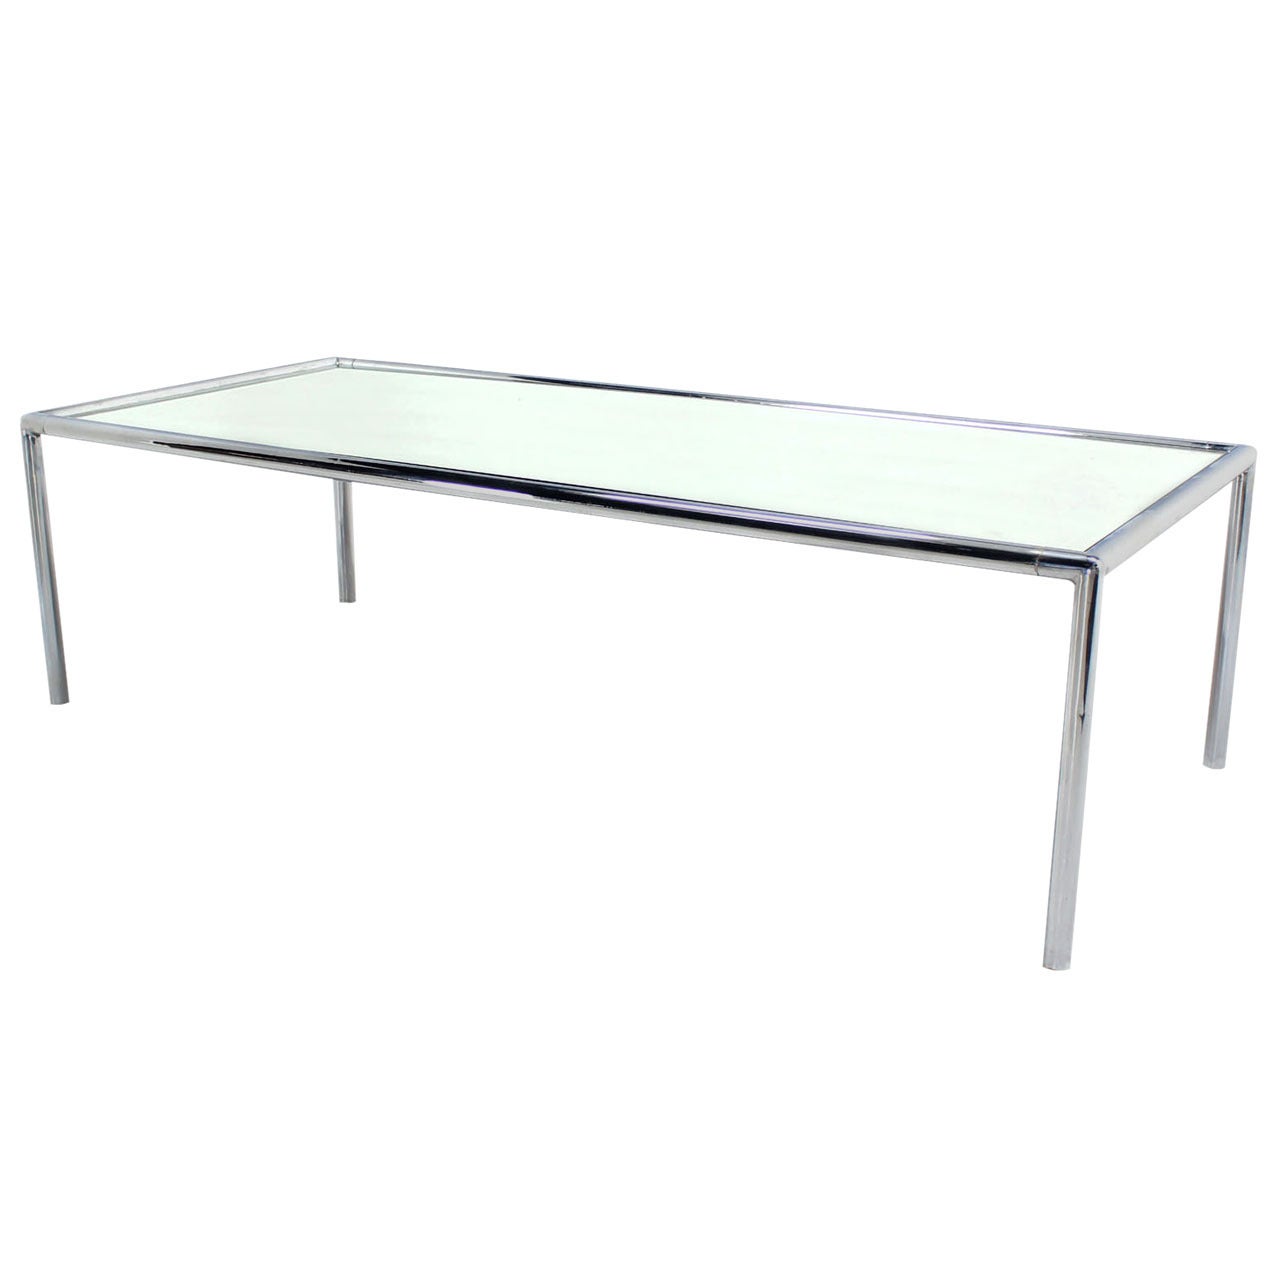 Extra Long Chrome Tubular Design Dining or Conference Table w/ Mirrored Top